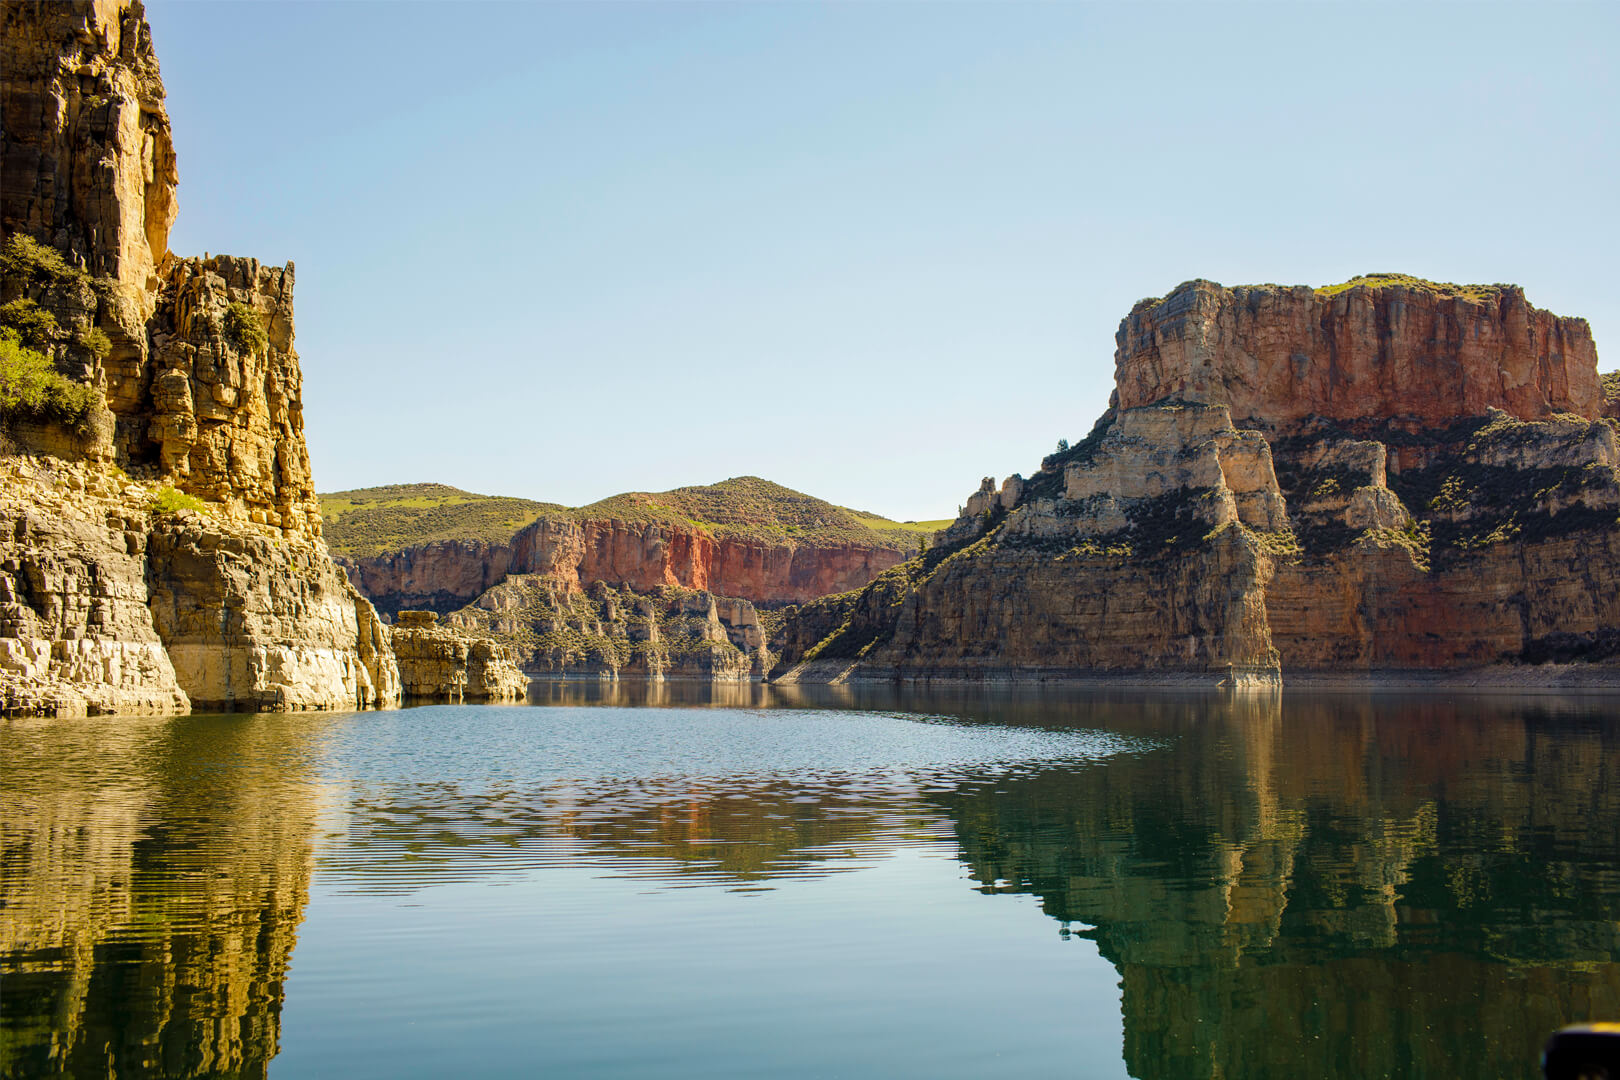 Bighorn river will bring to best sceneries that will relax your mind